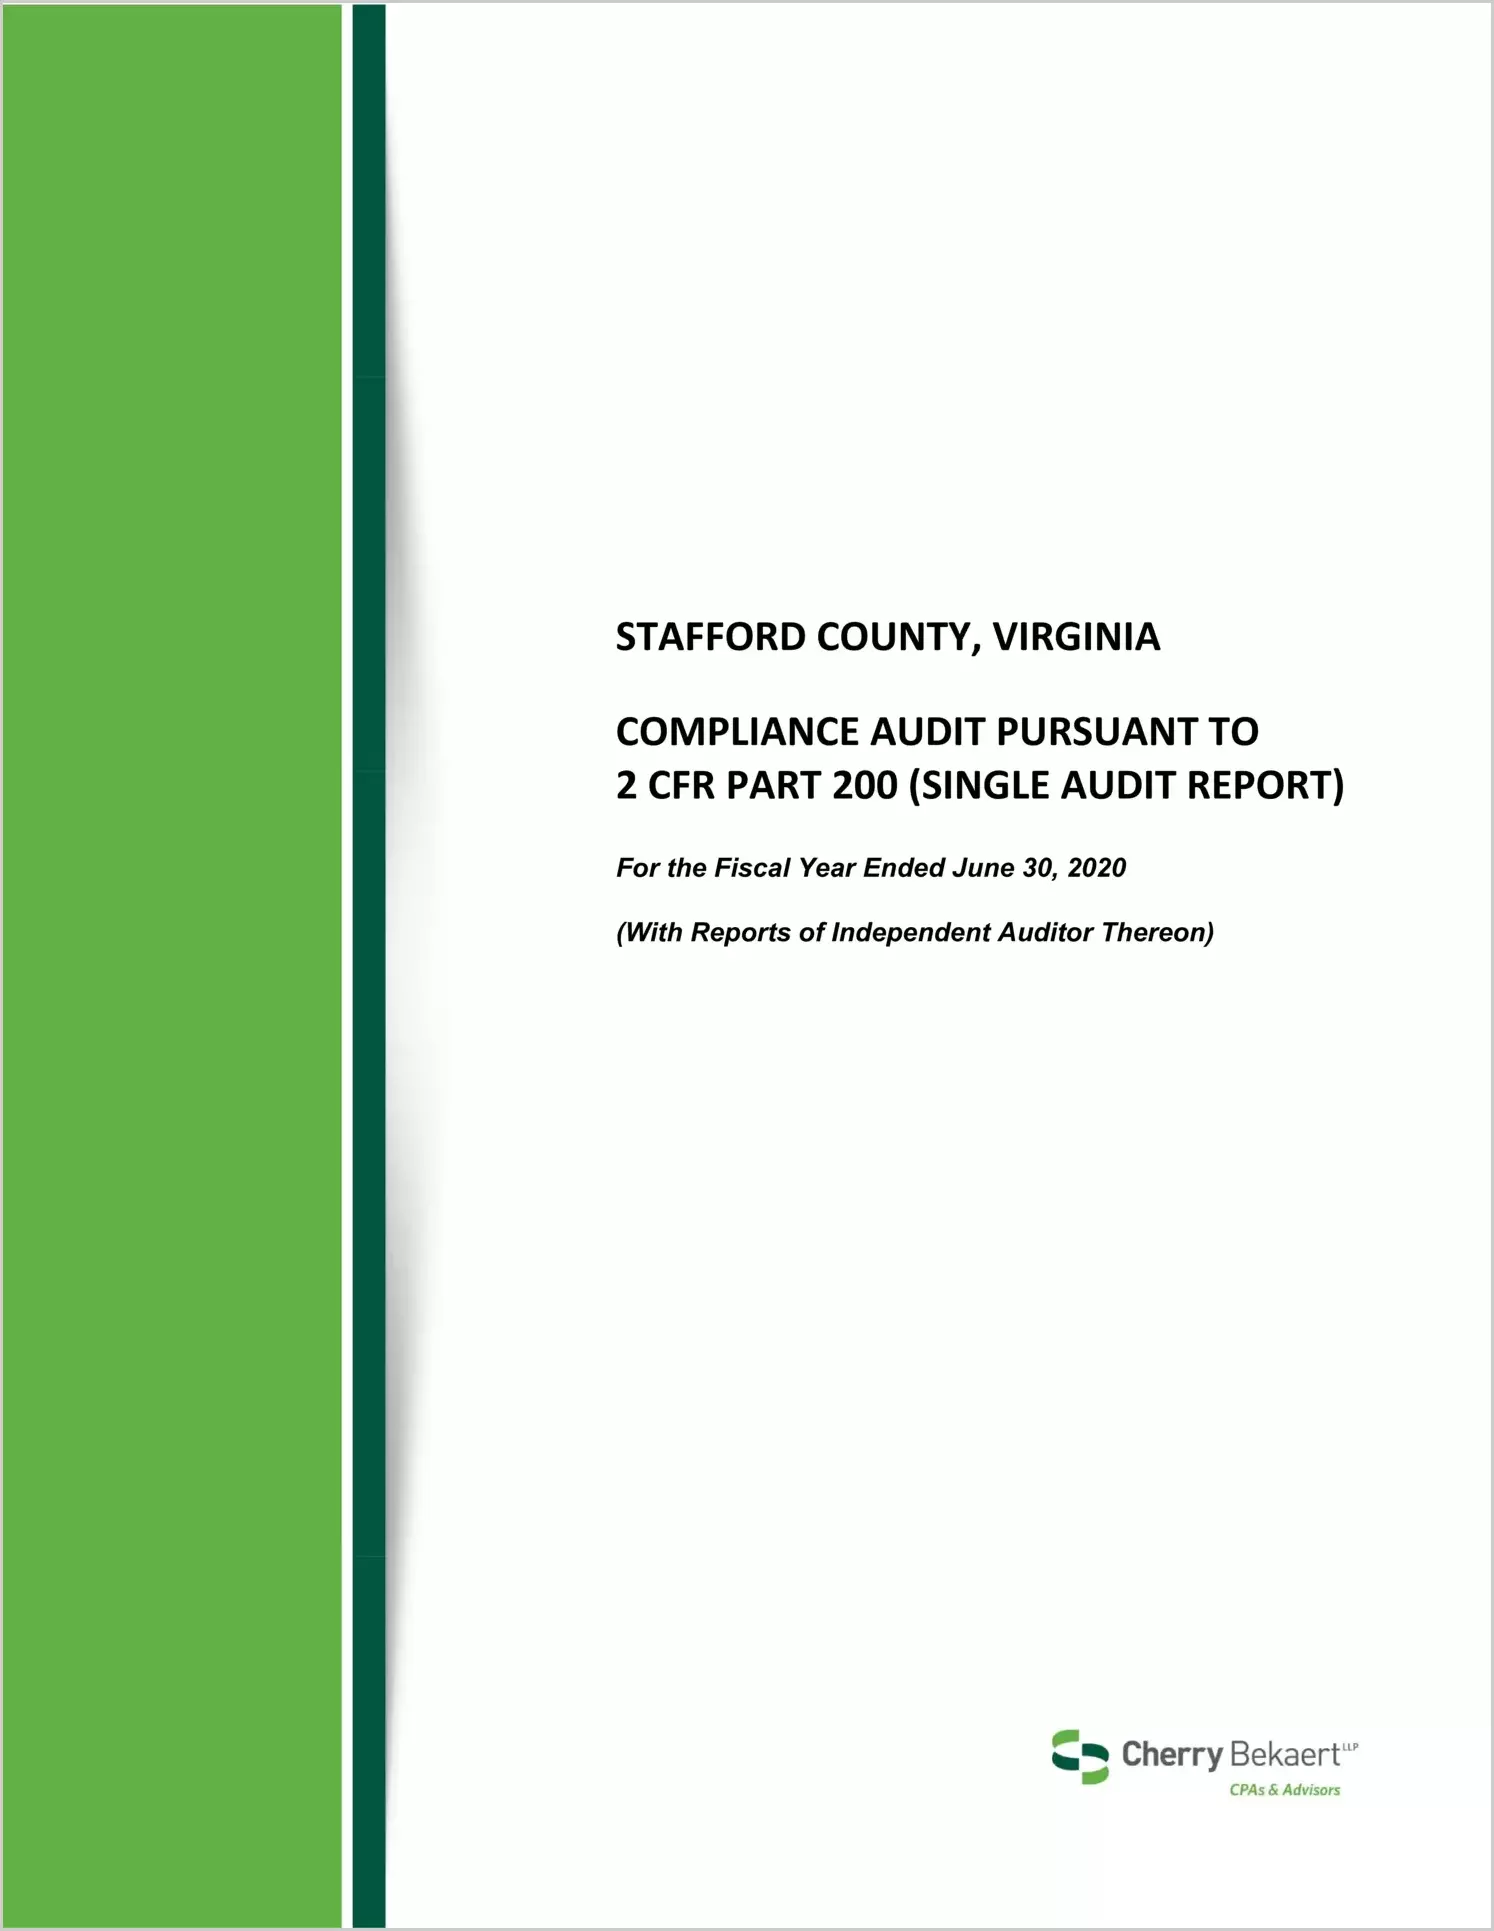 2020 Internal Control and Compliance Report for County of Stafford